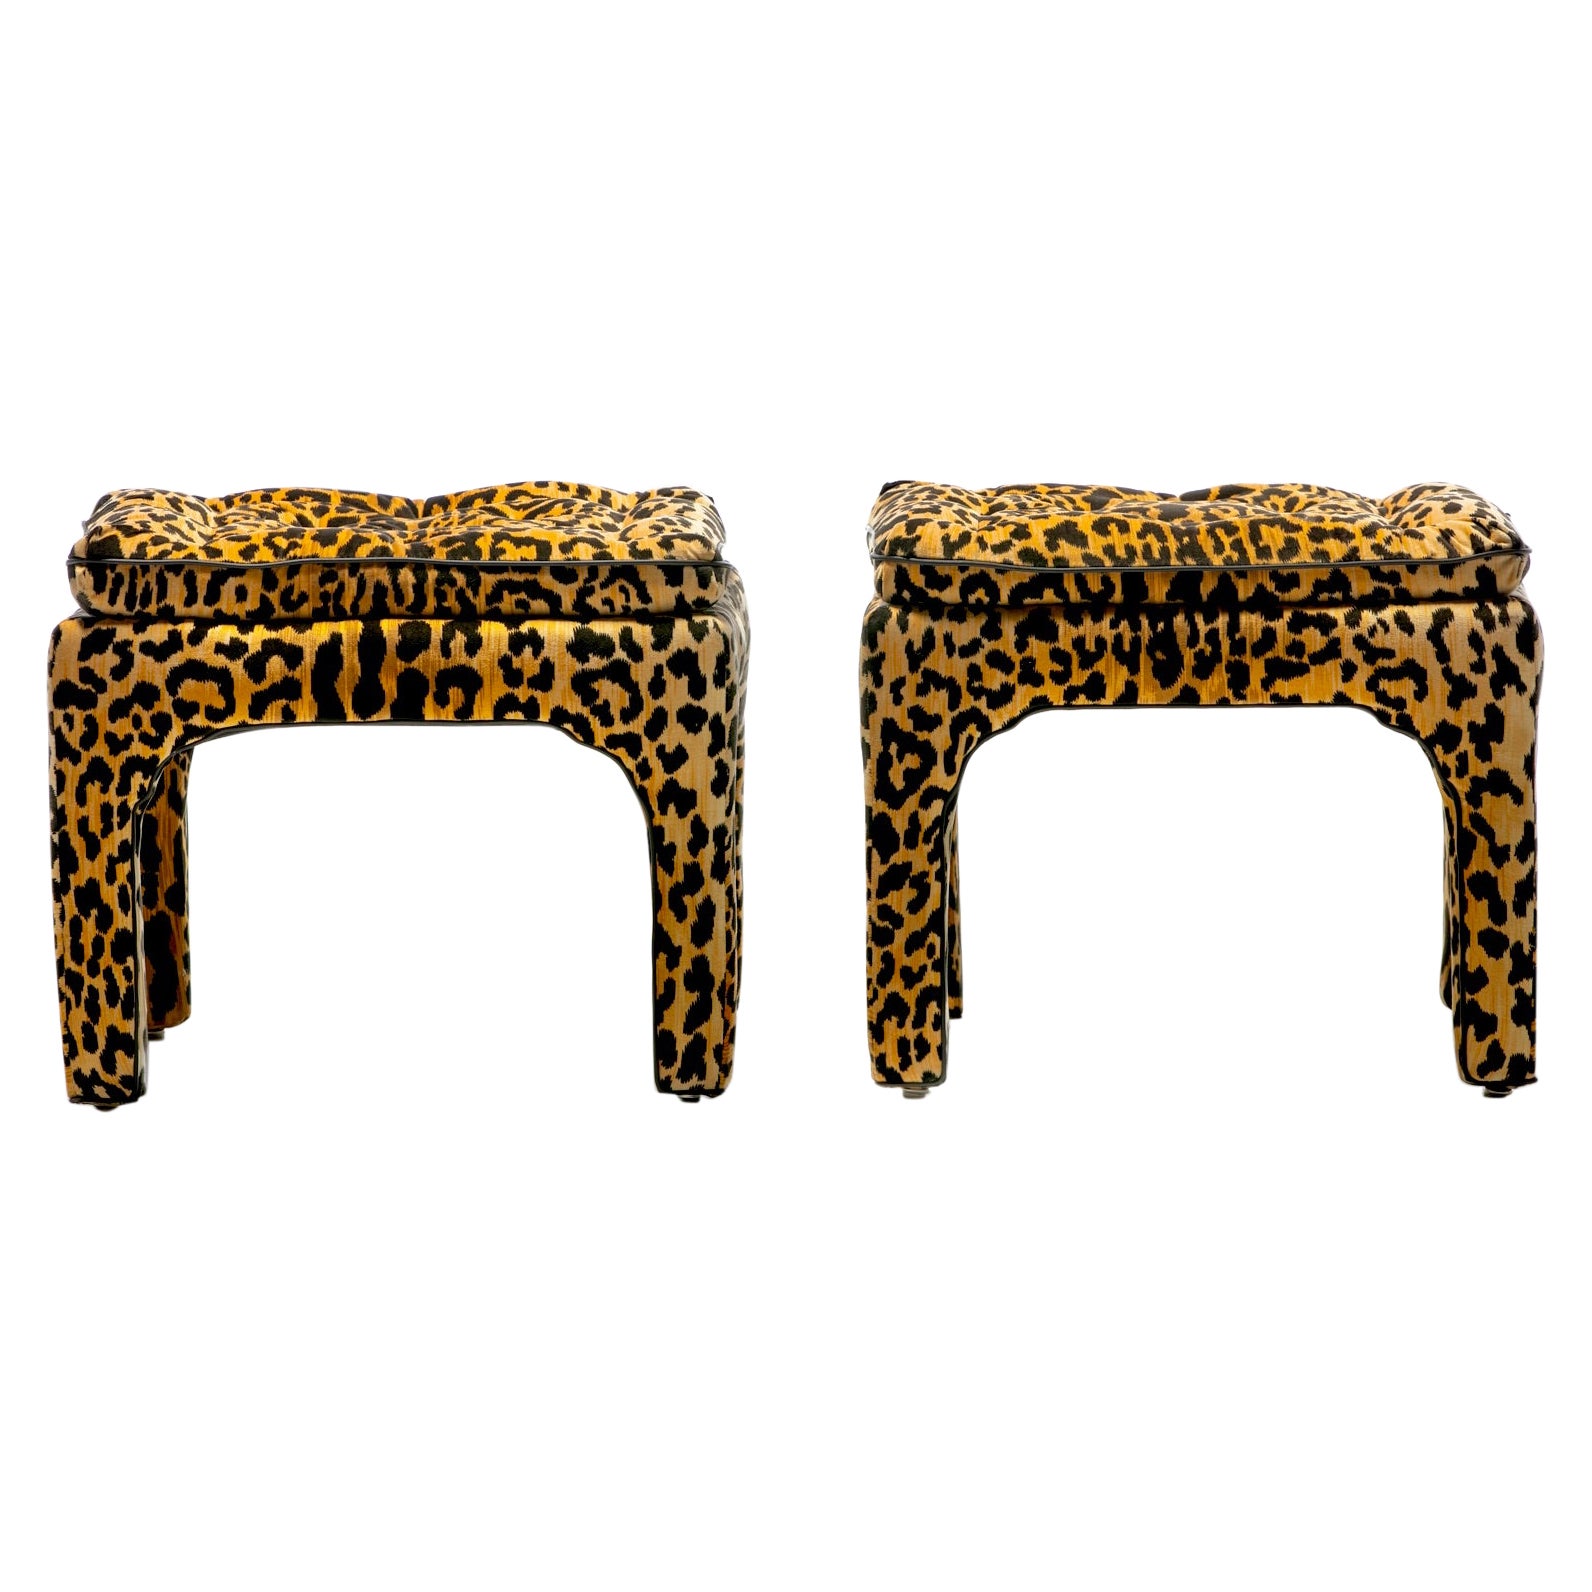 Pair of Billy Baldwin Style Leopard Velvet Stools with Leather Piping c. 1970s